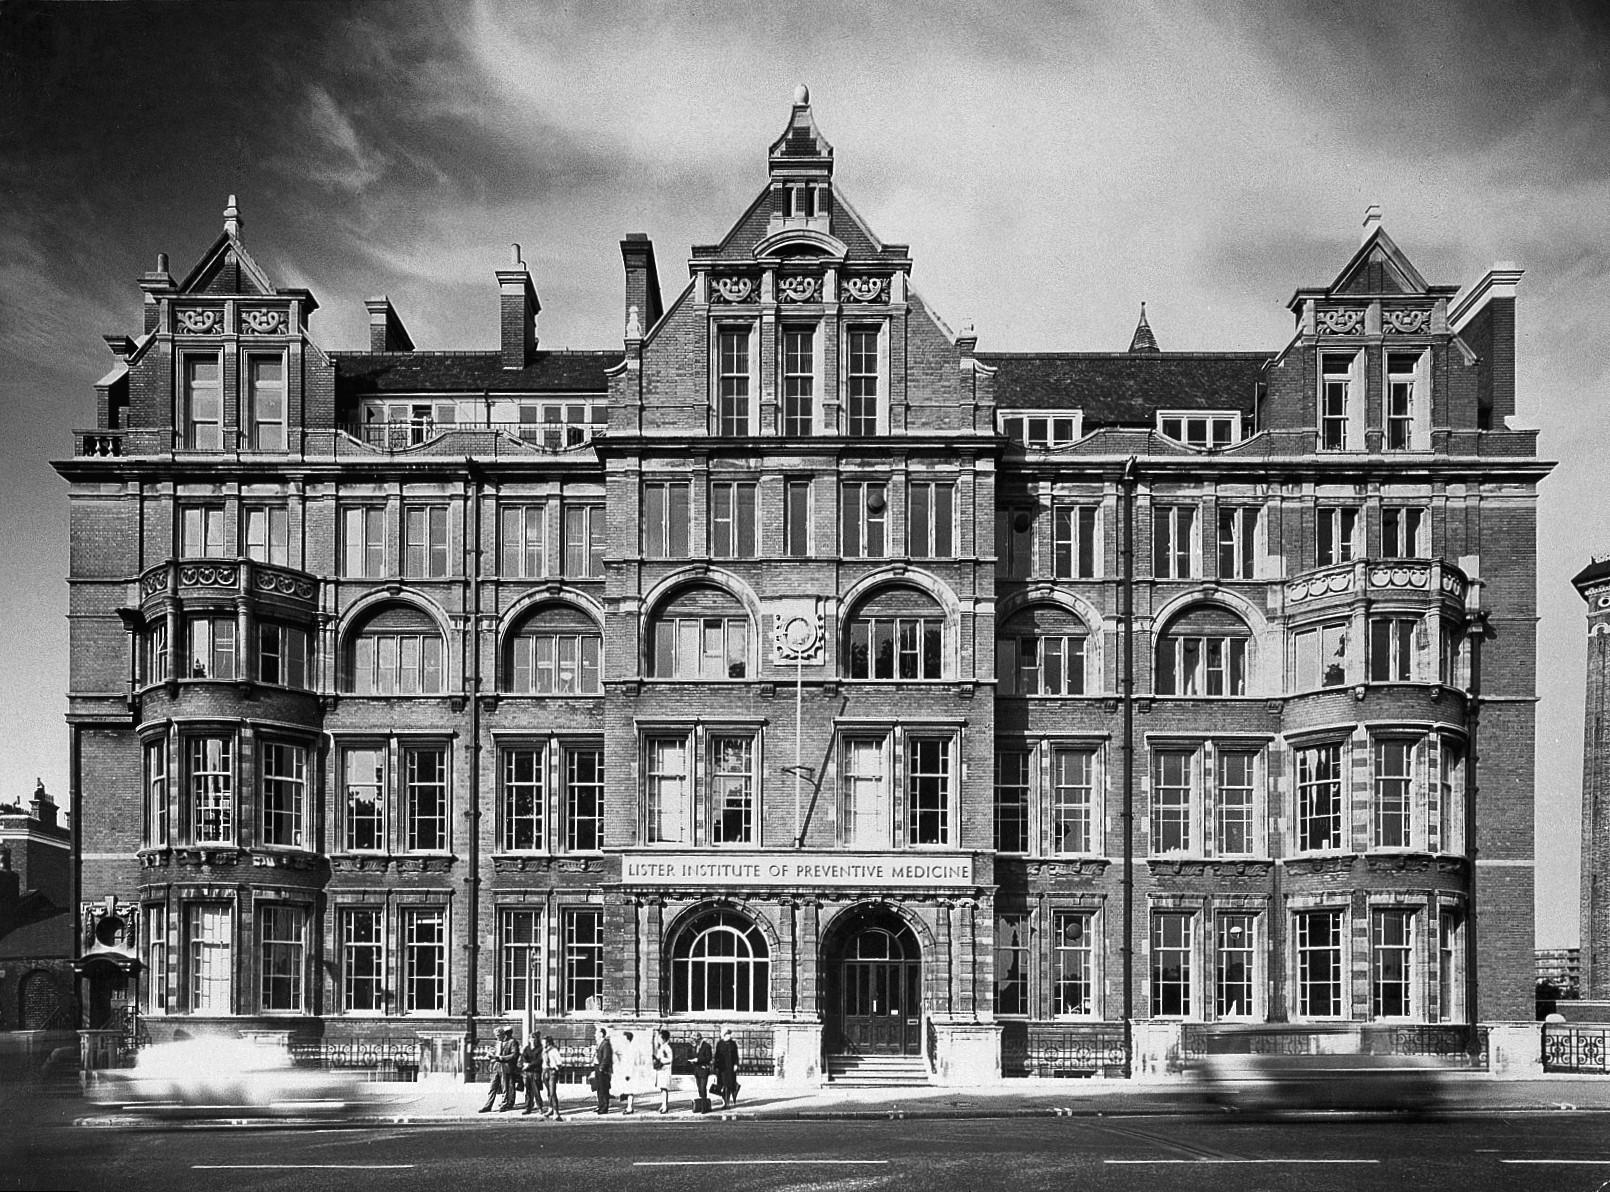 The collection first opened in London in 1920 at the Lister Institute of Preventive Medicine